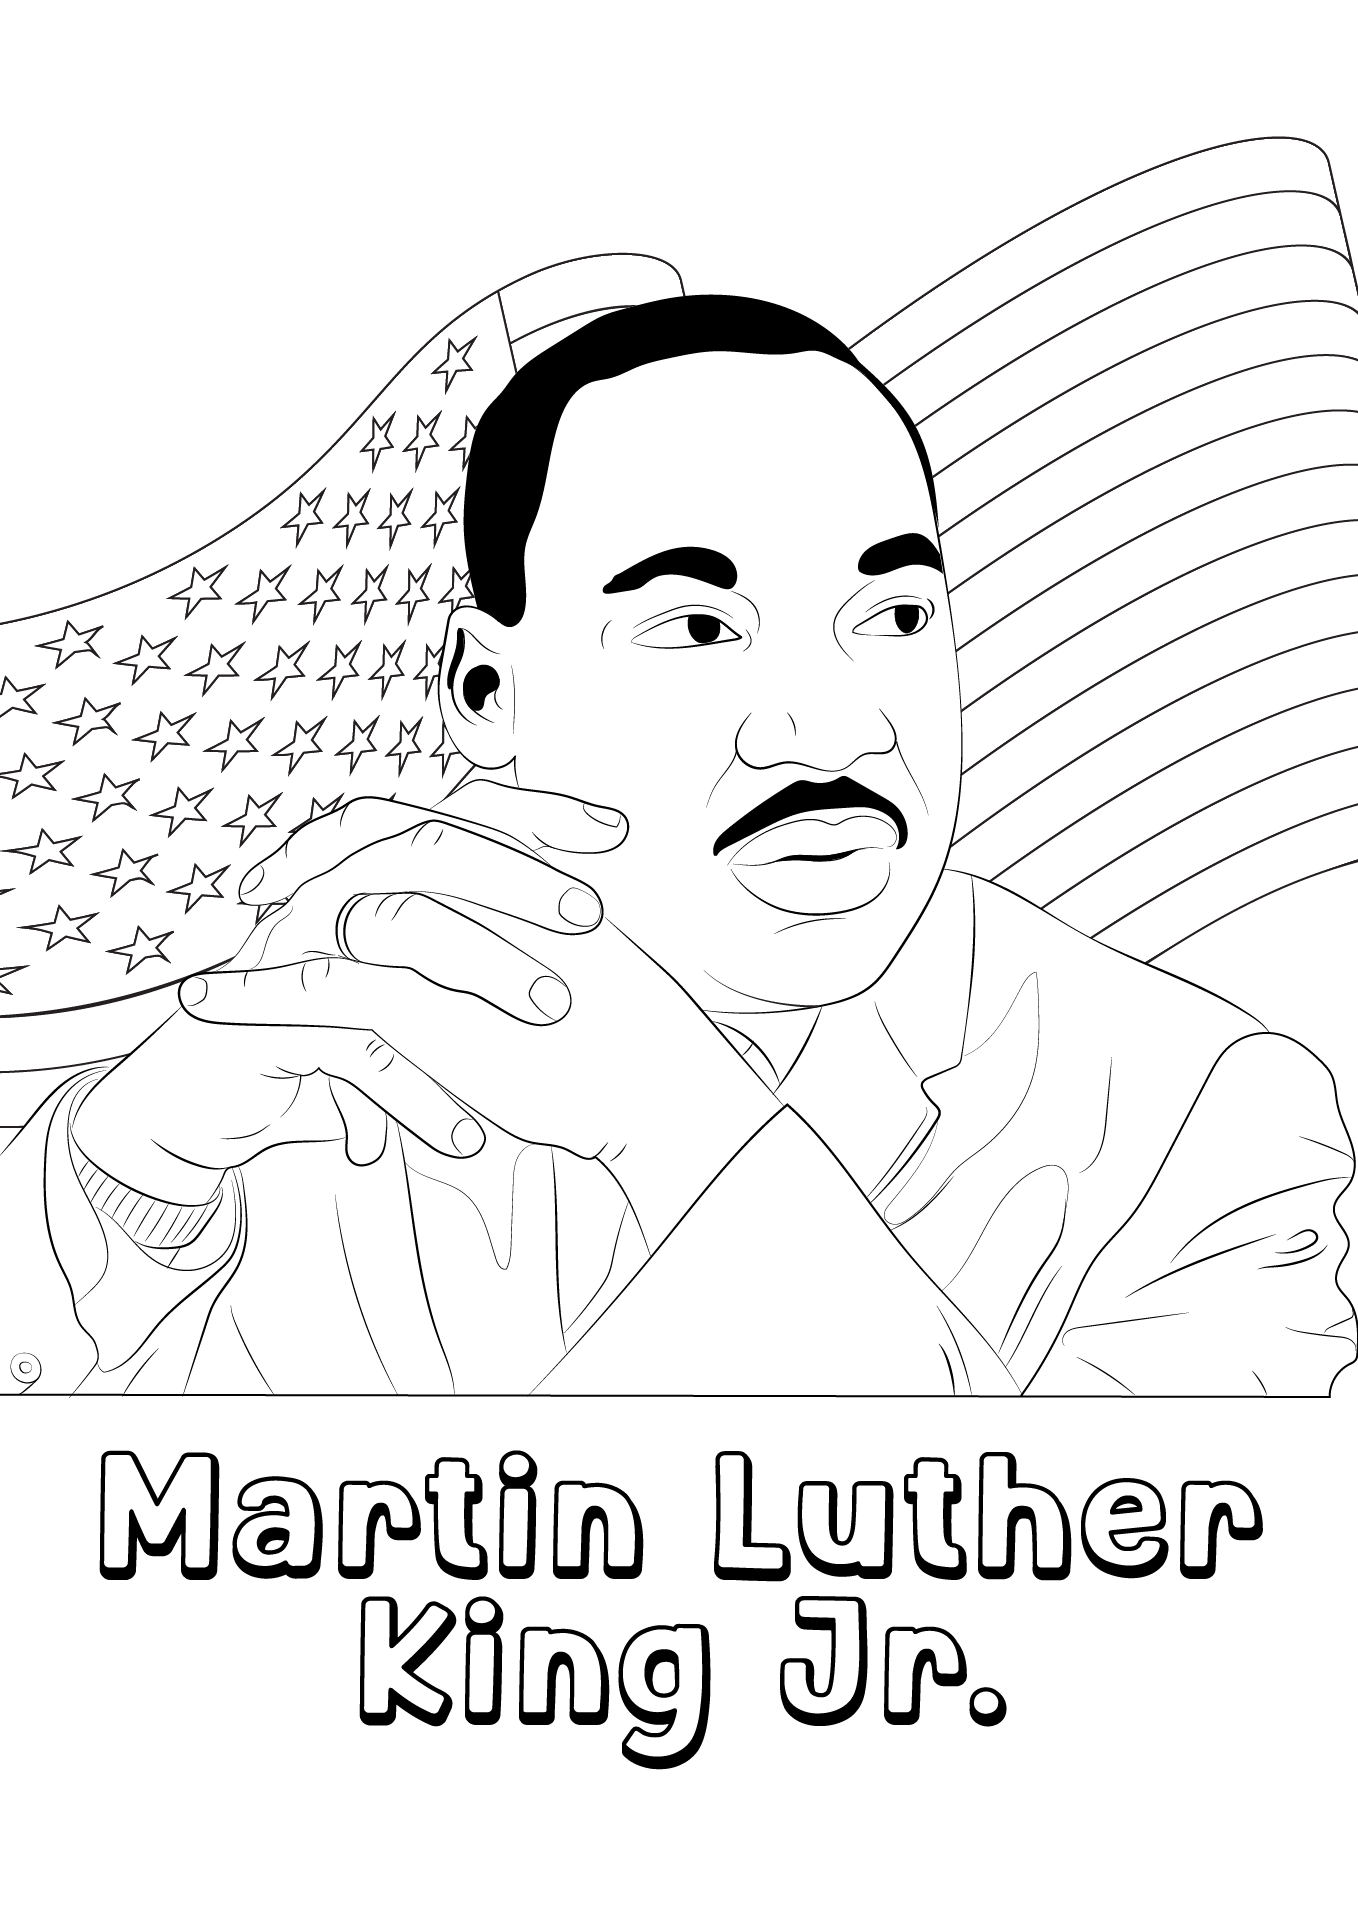 Martin Luther King Jr. Coloring